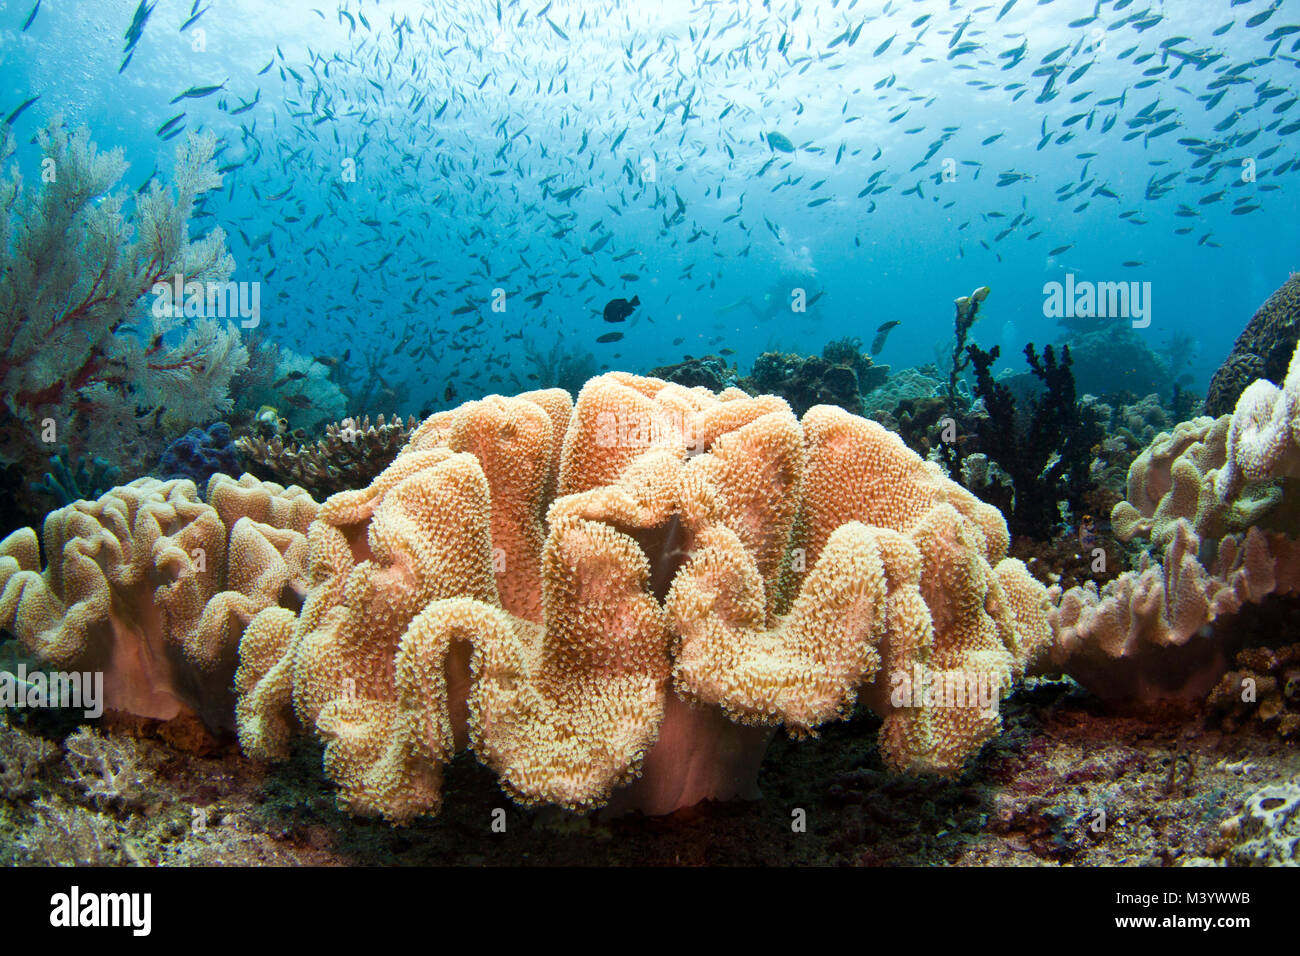 Coral reefs in the Indo Pacific have the highest biodiversity ever recorded in an oceanic habitat. Stock Photo